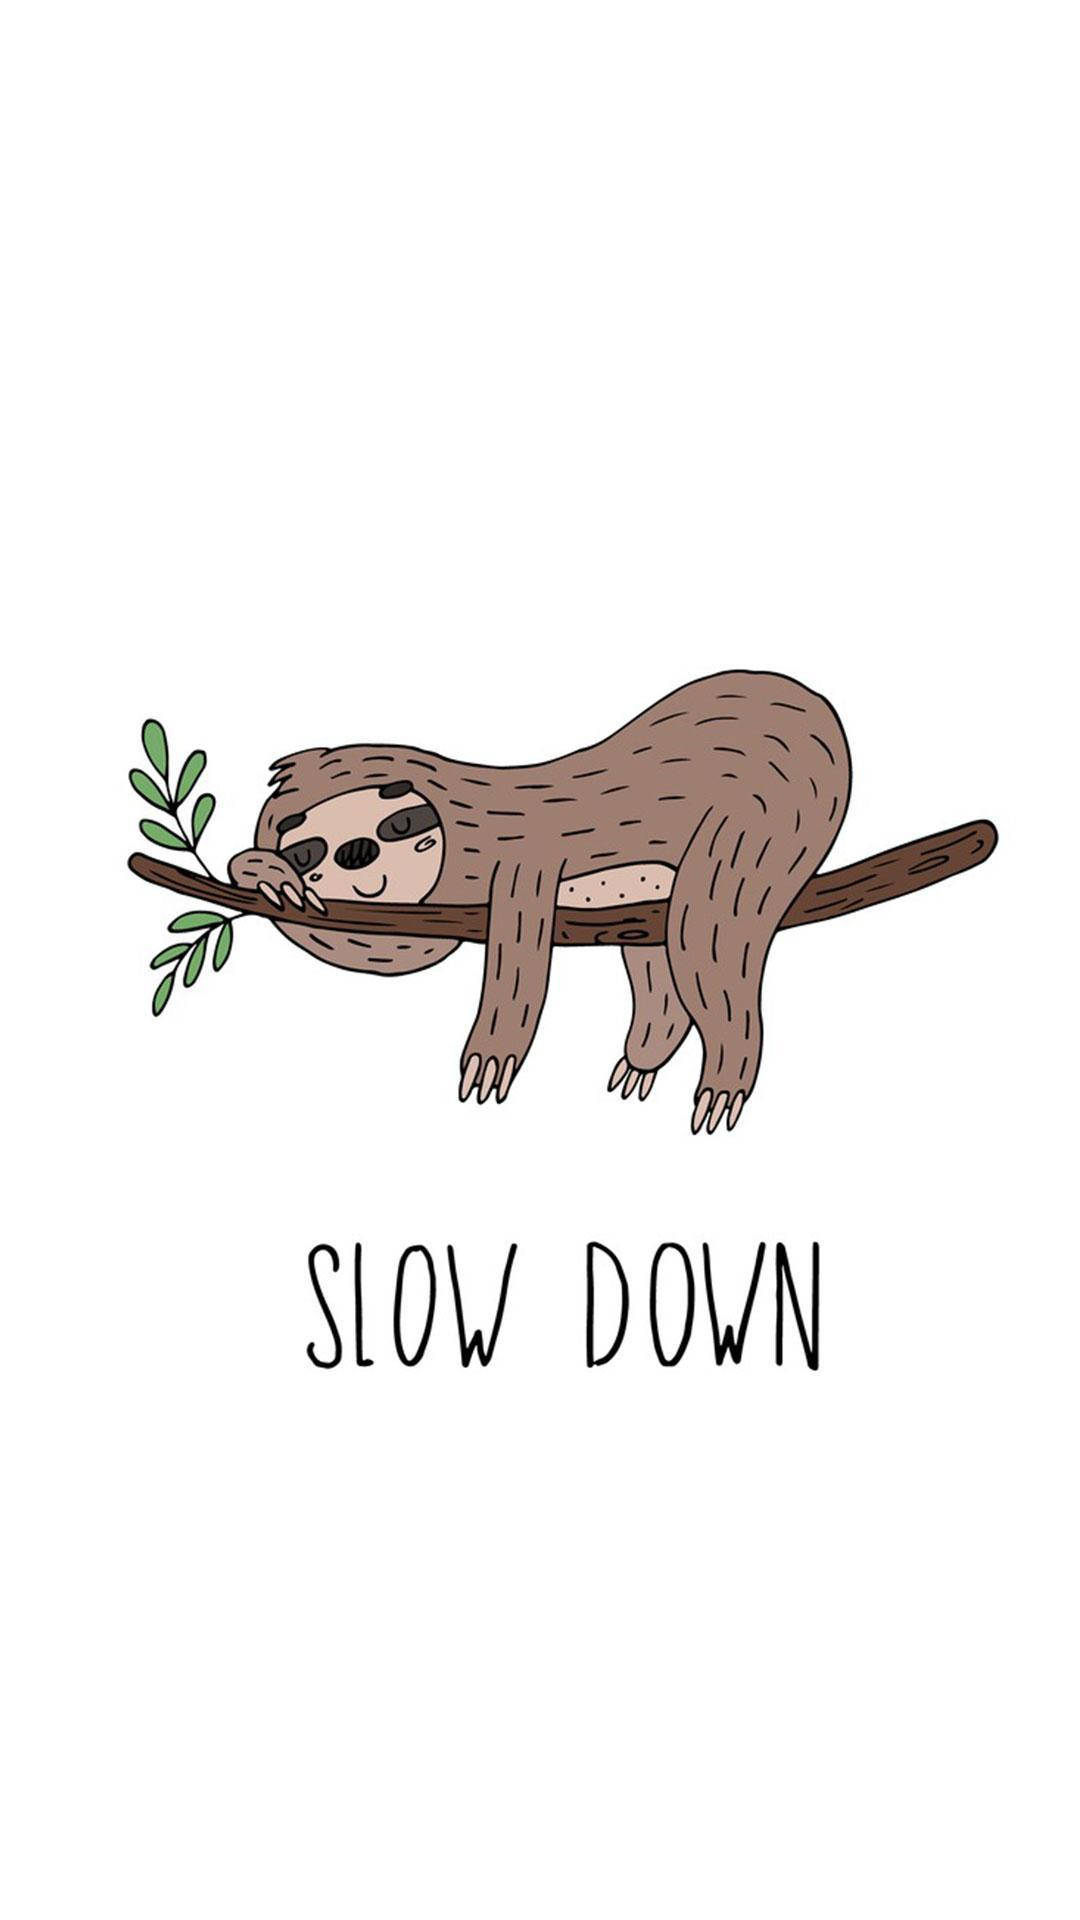 Baby Sloth Slow Down